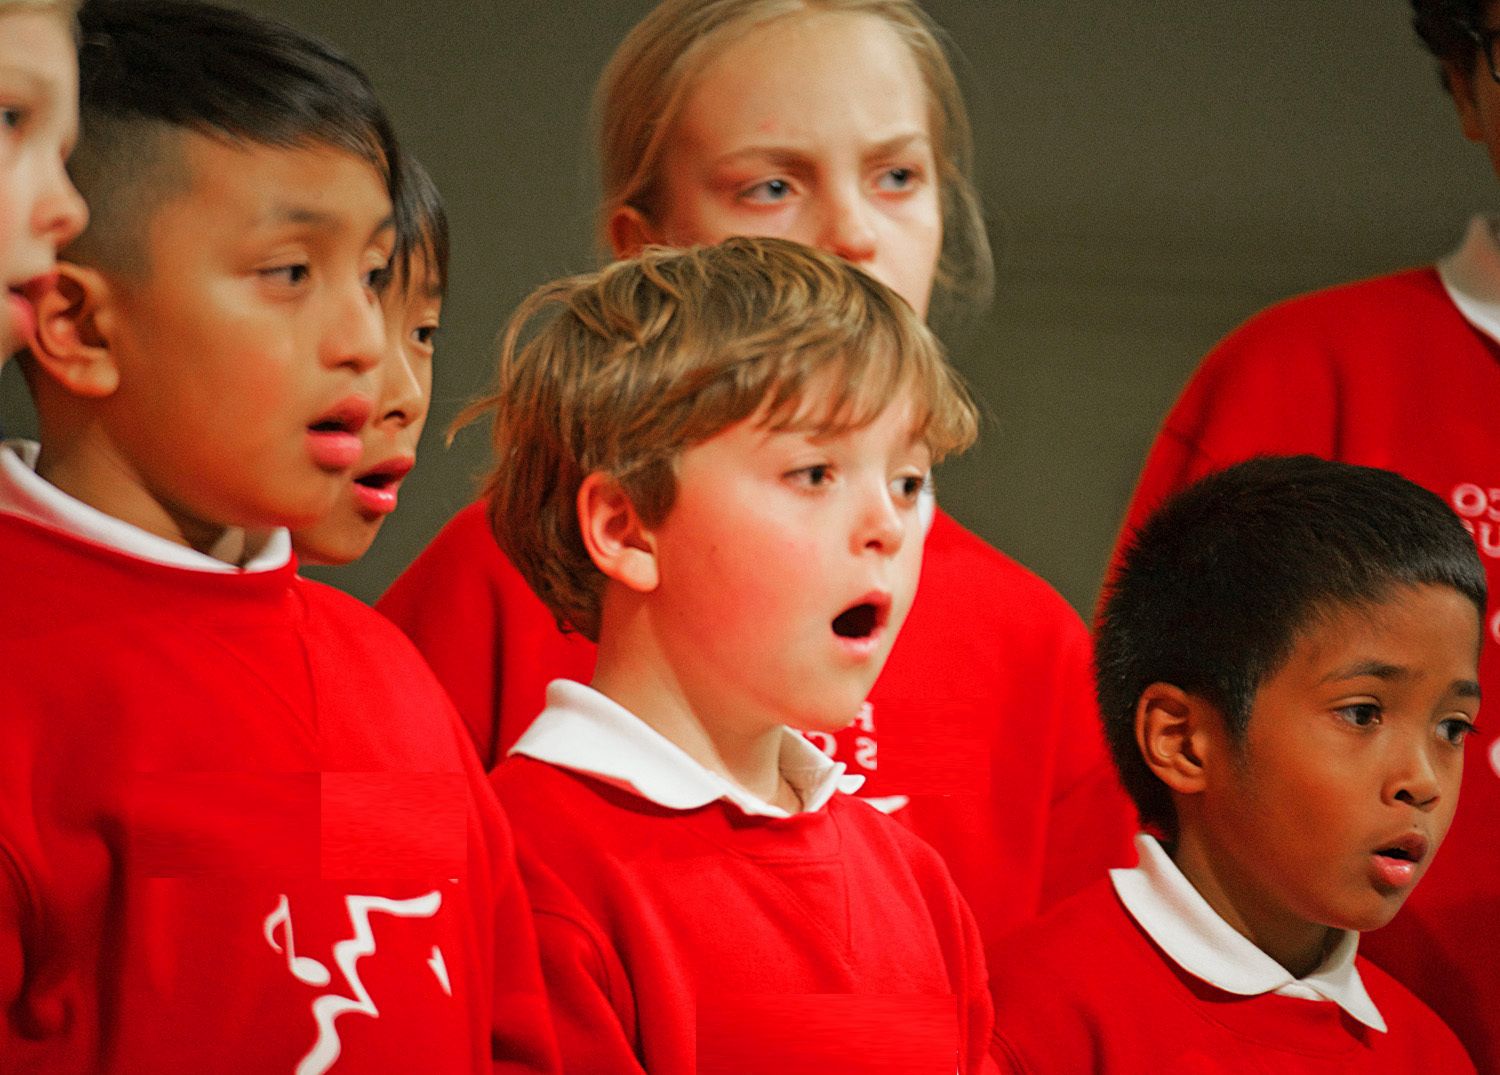 Auditions in San Francisco, San Mateo, San Rafael and Oakland on May 11th for SF Boys Chorus, Online Event